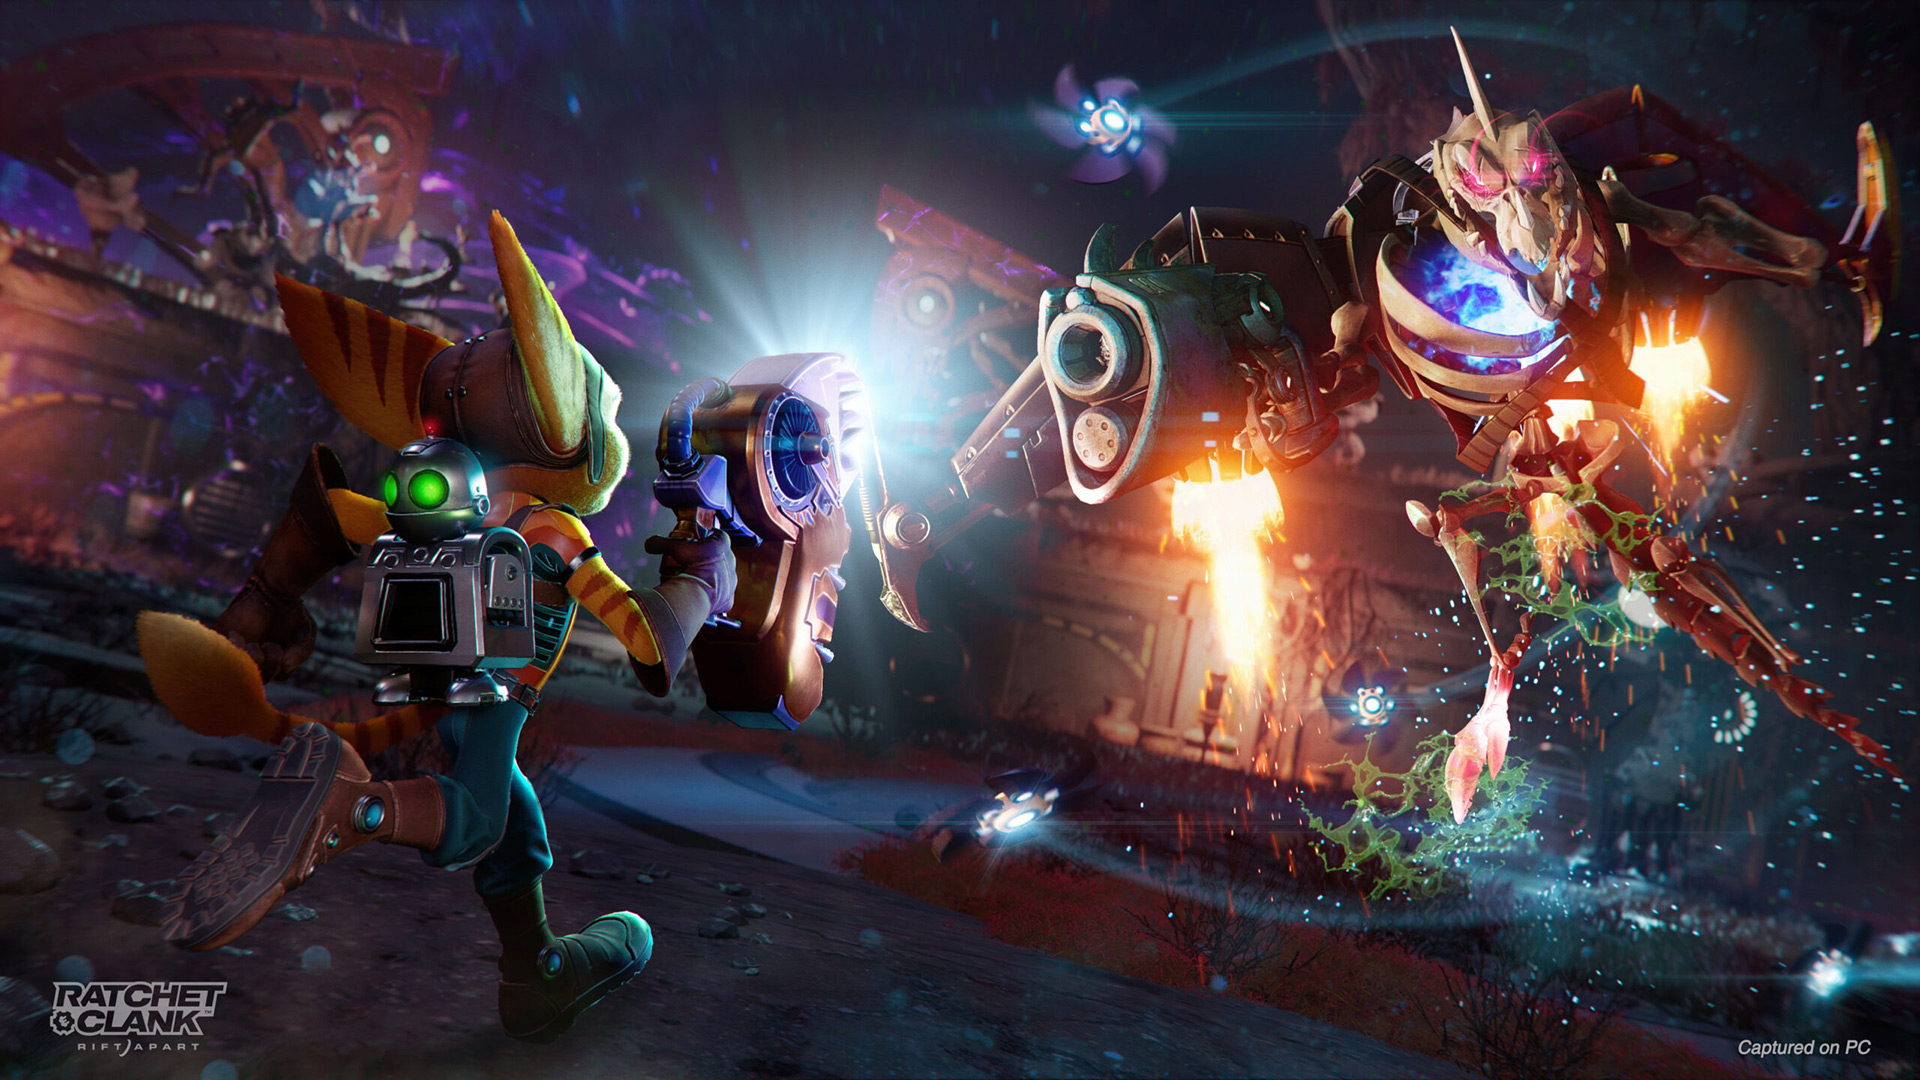 Ratchet & Clank: Rift Apart will be available on PC July 26, 2023